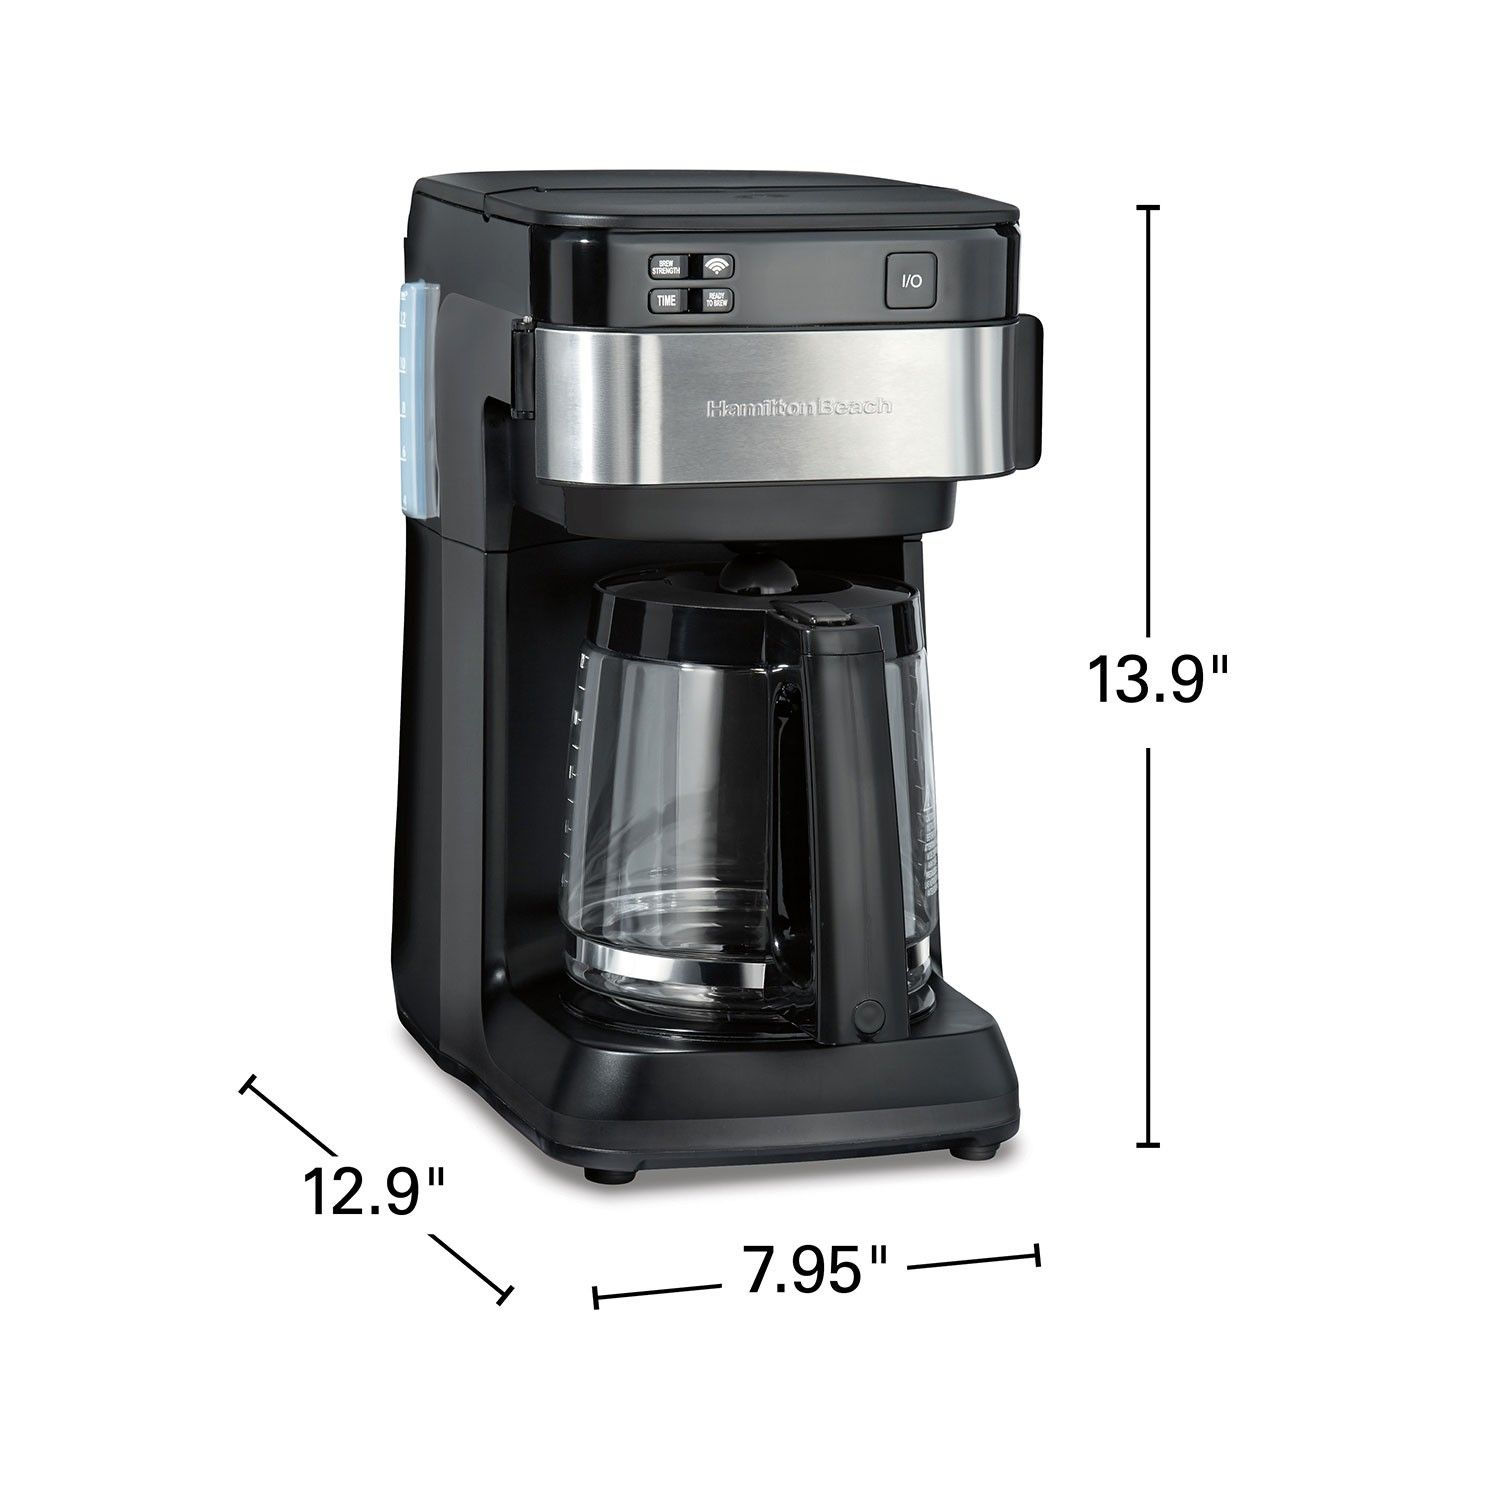 The size and dimensions of the Hamilton Beach Smart 12 Cup Coffee Maker.